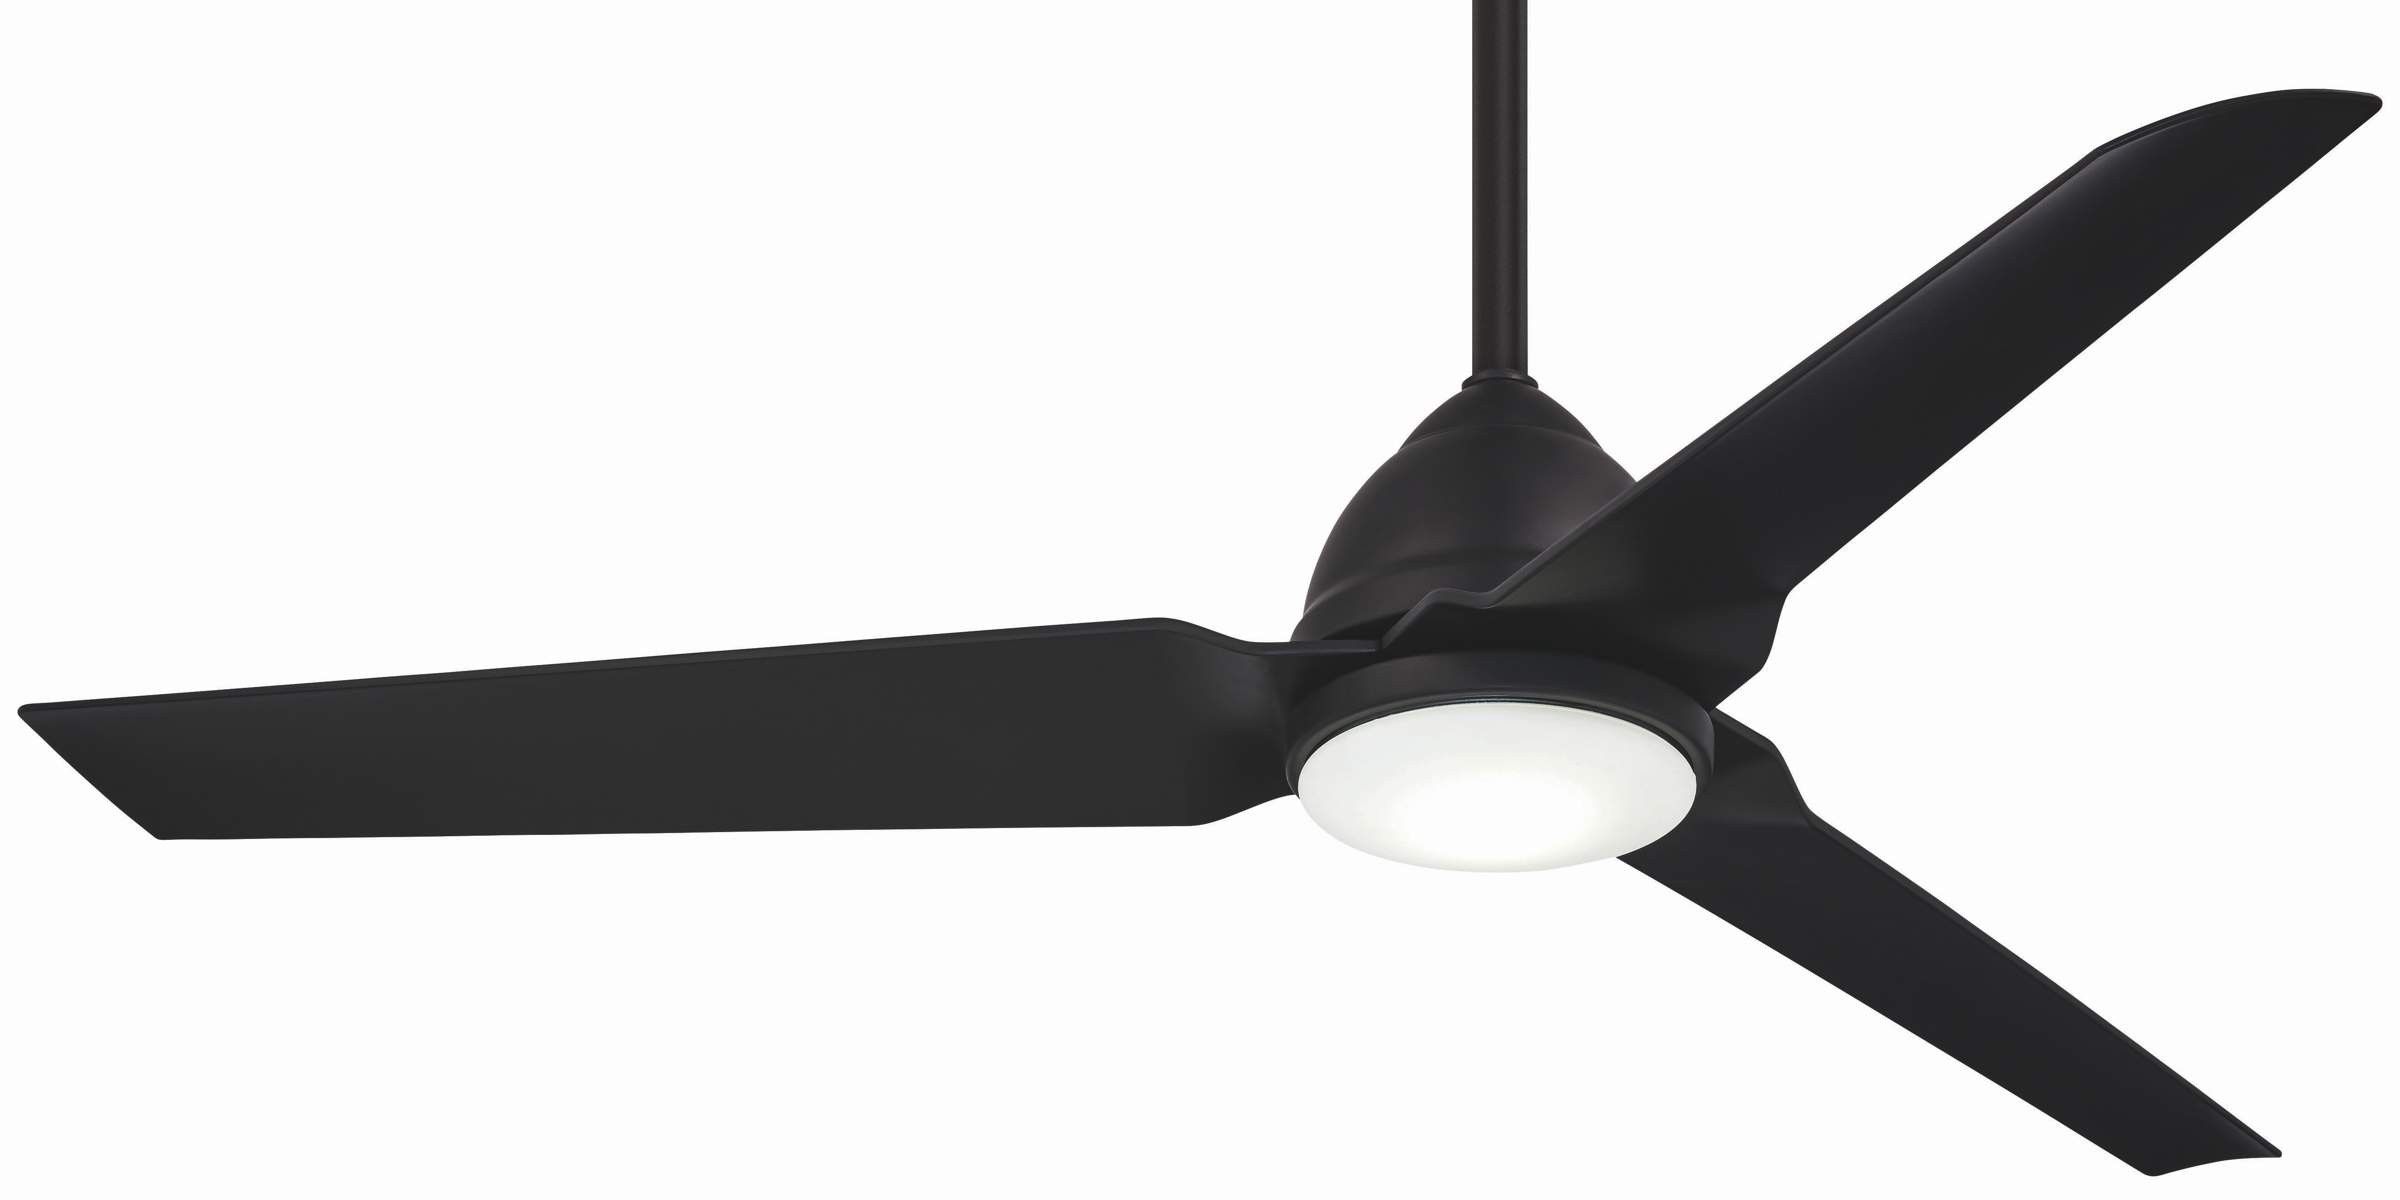 Java 3 Blade Outdoor Ceiling Fans Within 2019 Minka Aire Java Led Ceiling Fan Model F753lcl In Coal (View 14 of 20)